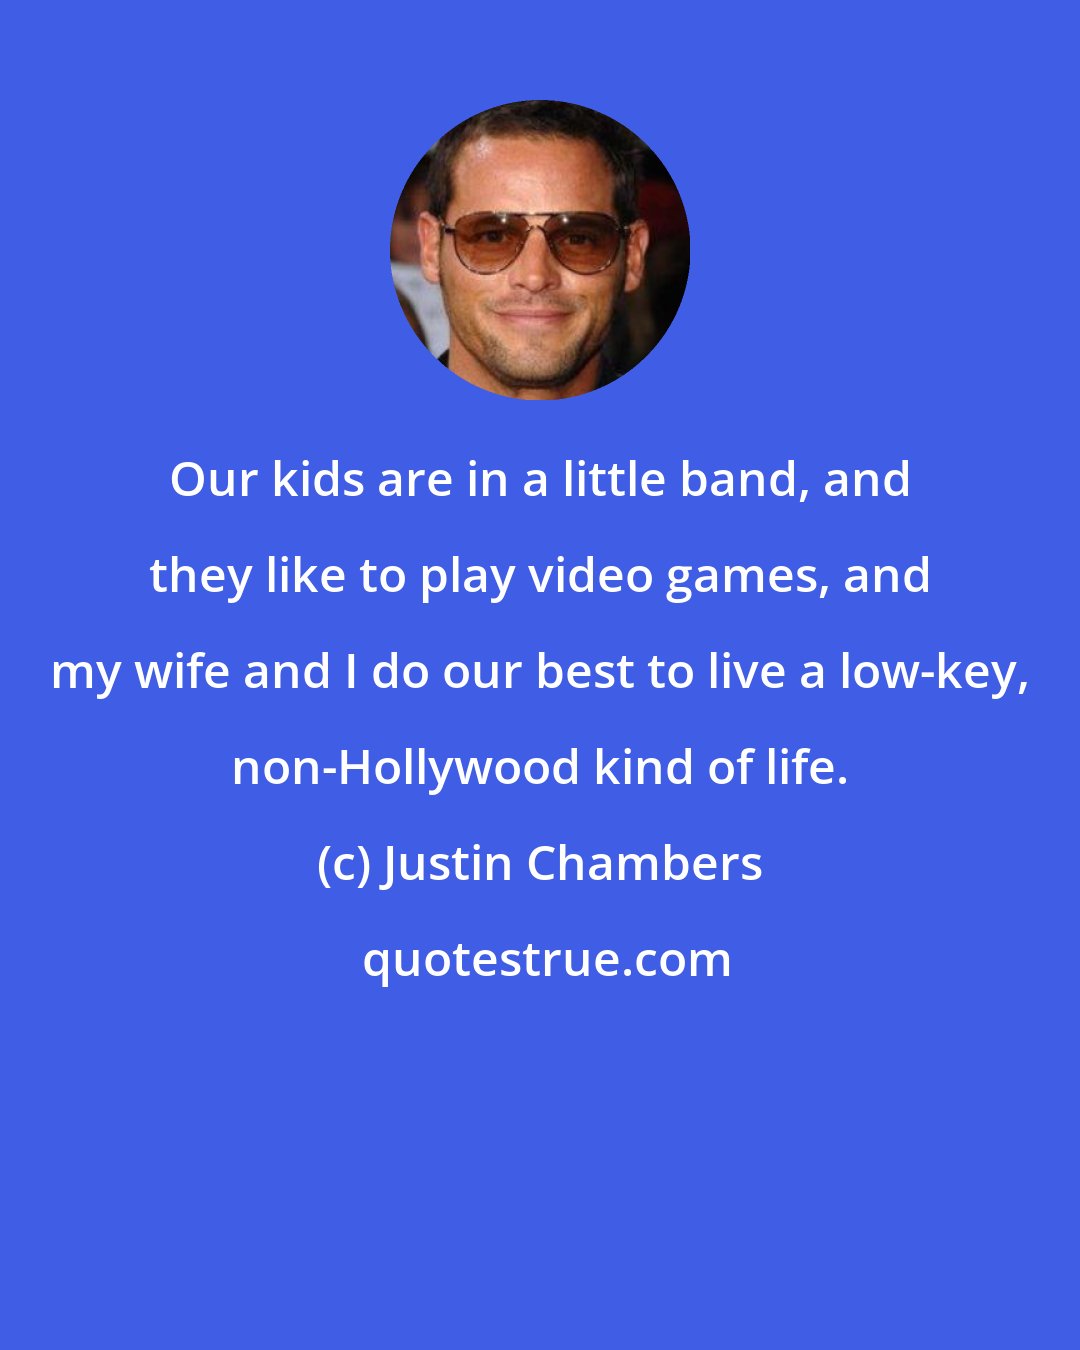 Justin Chambers: Our kids are in a little band, and they like to play video games, and my wife and I do our best to live a low-key, non-Hollywood kind of life.